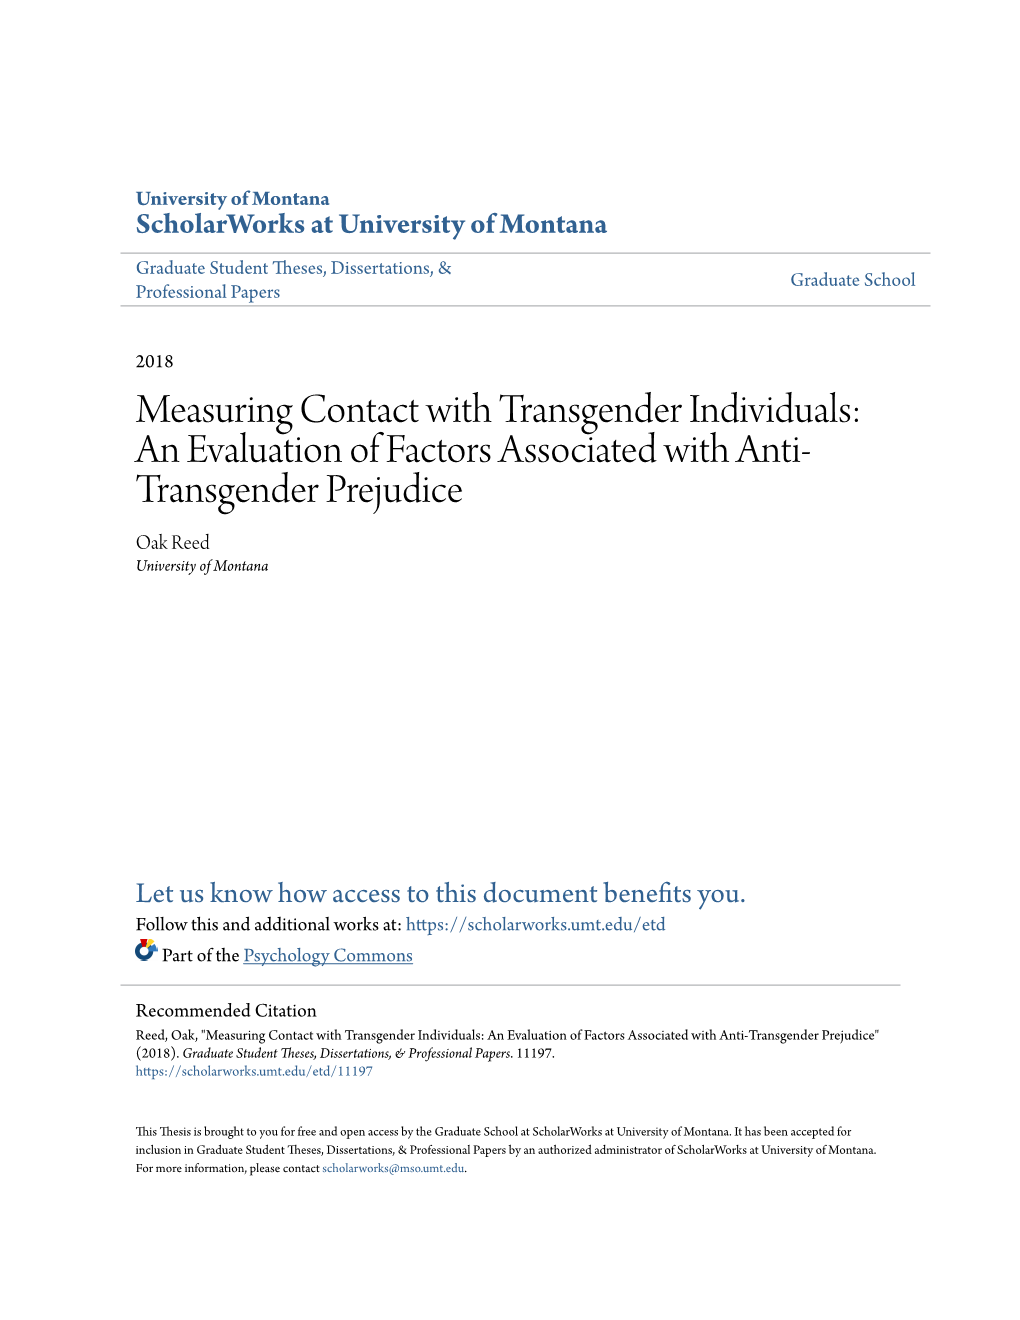 An Evaluation of Factors Associated with Anti-Transgender Prejudice" (2018)